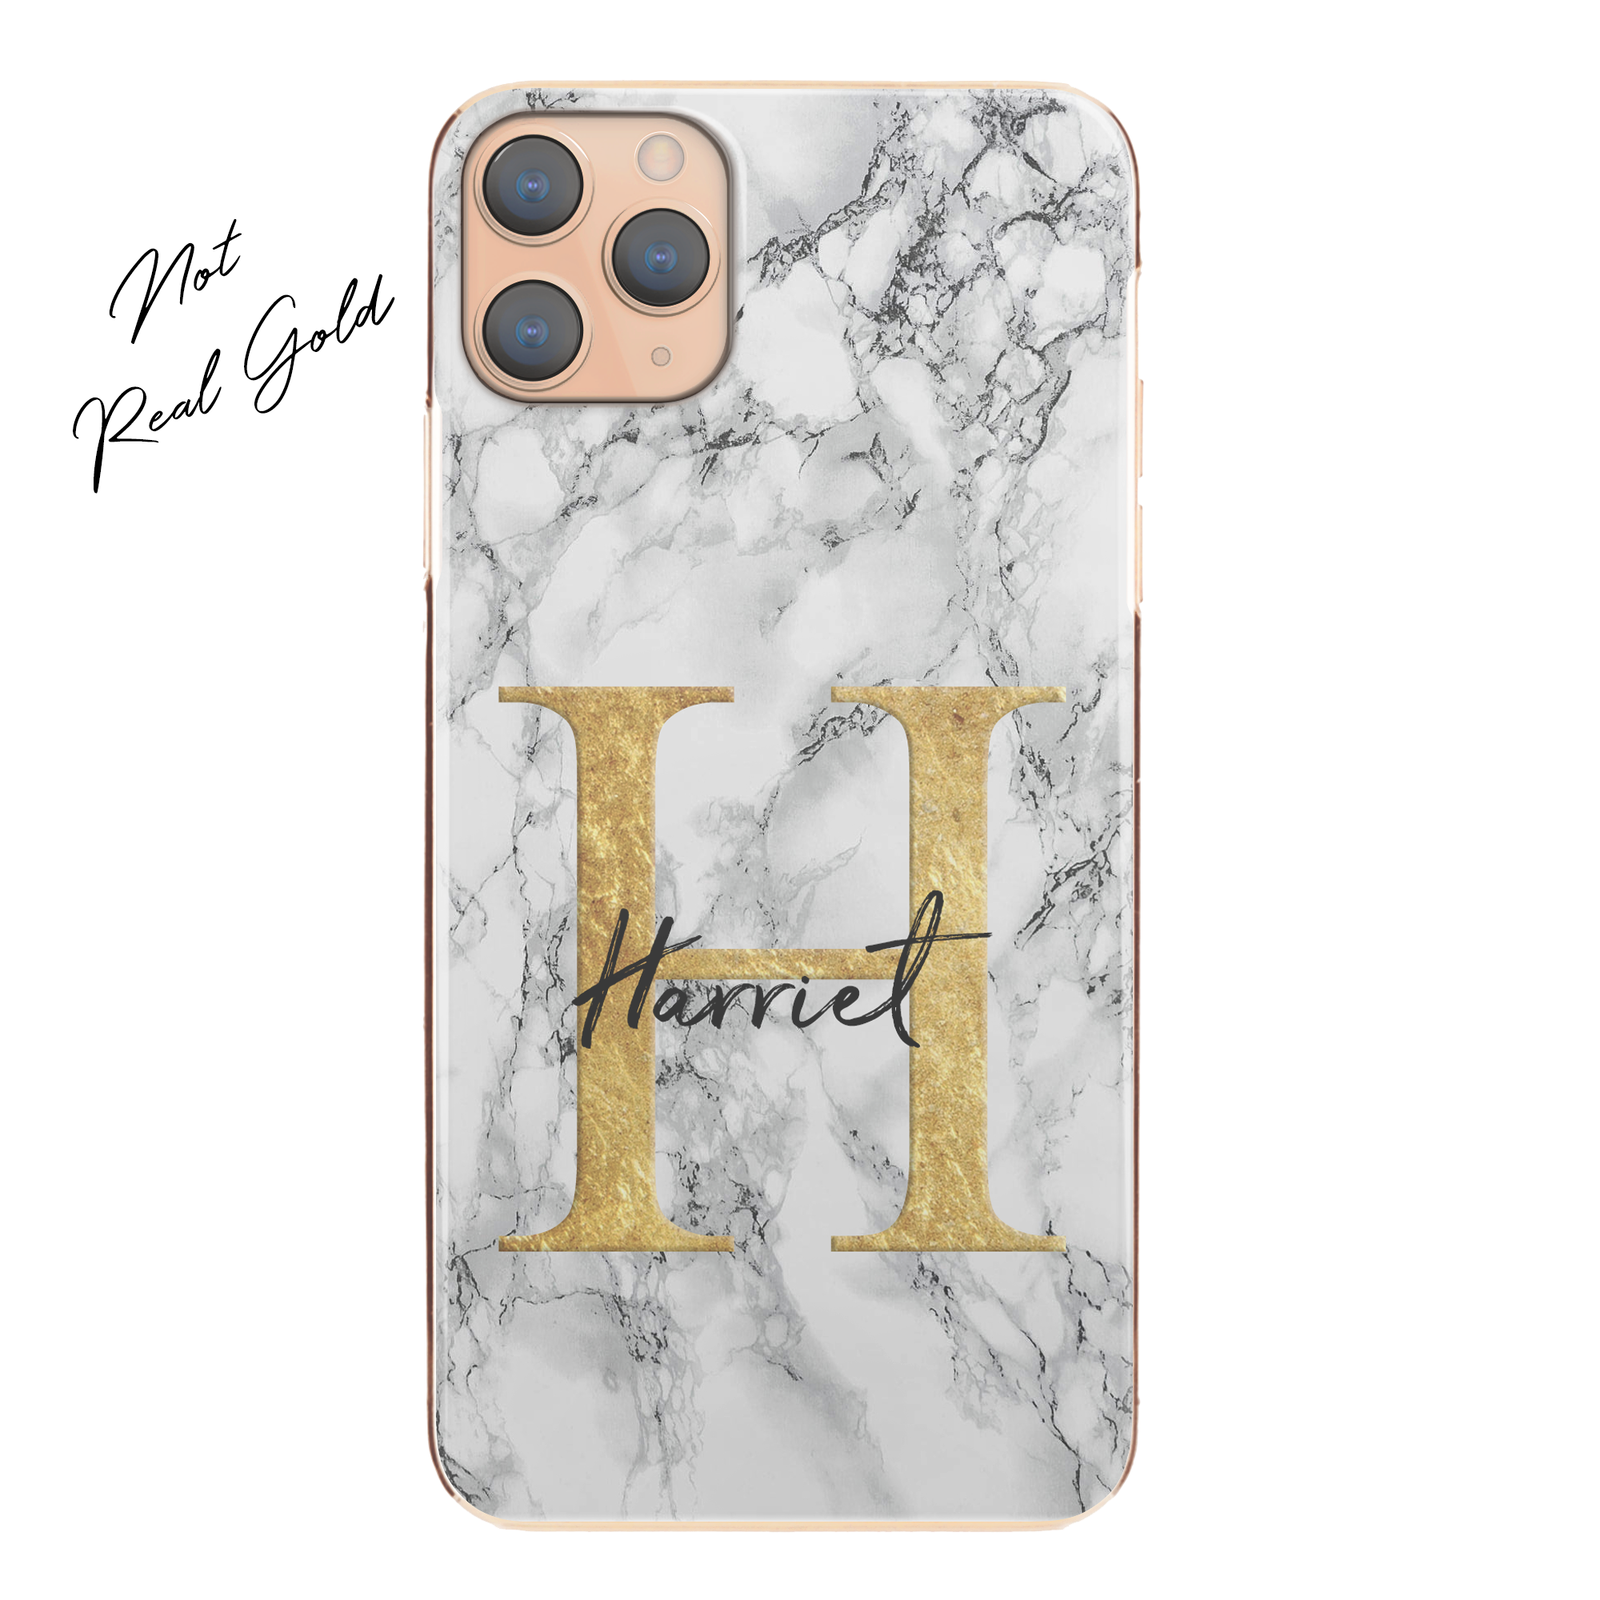 Personalised Phone Case For Apple iPhone 7 Initial Marble Hard Cover